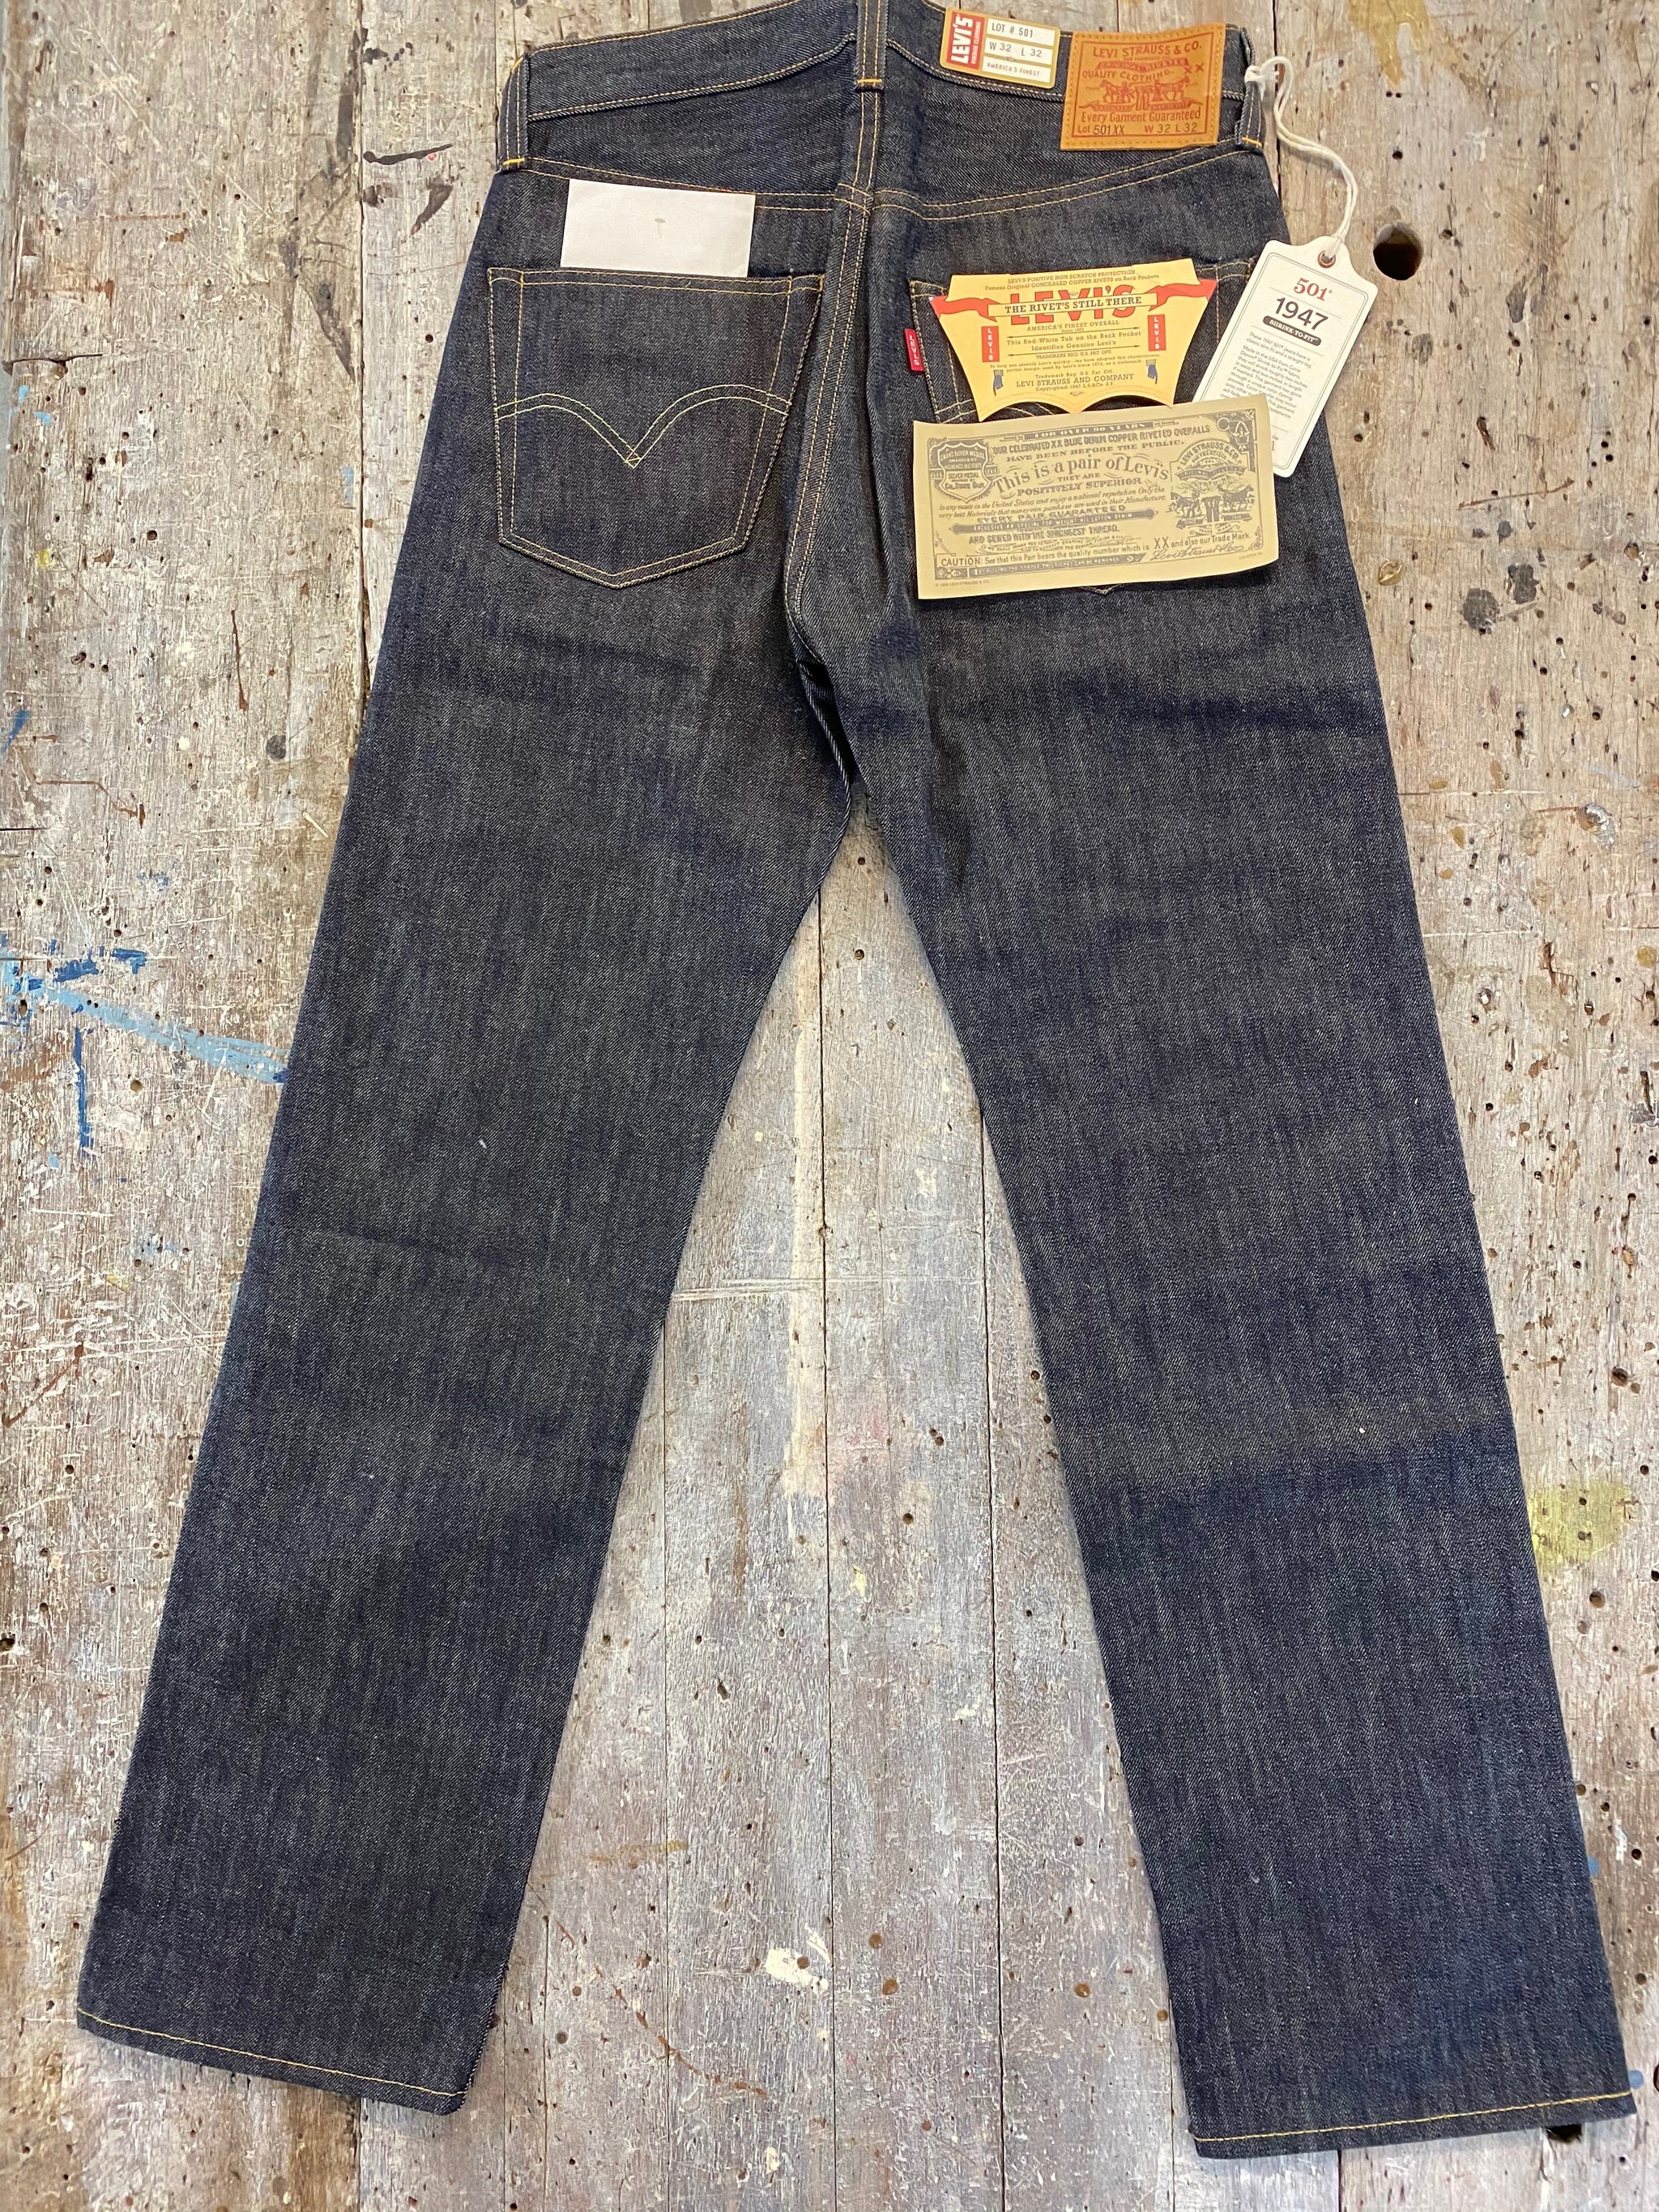 LEVIS VINTAGE CLOTHING 1947 501 RAW SHRINK TO FIT - Elroy Clothing